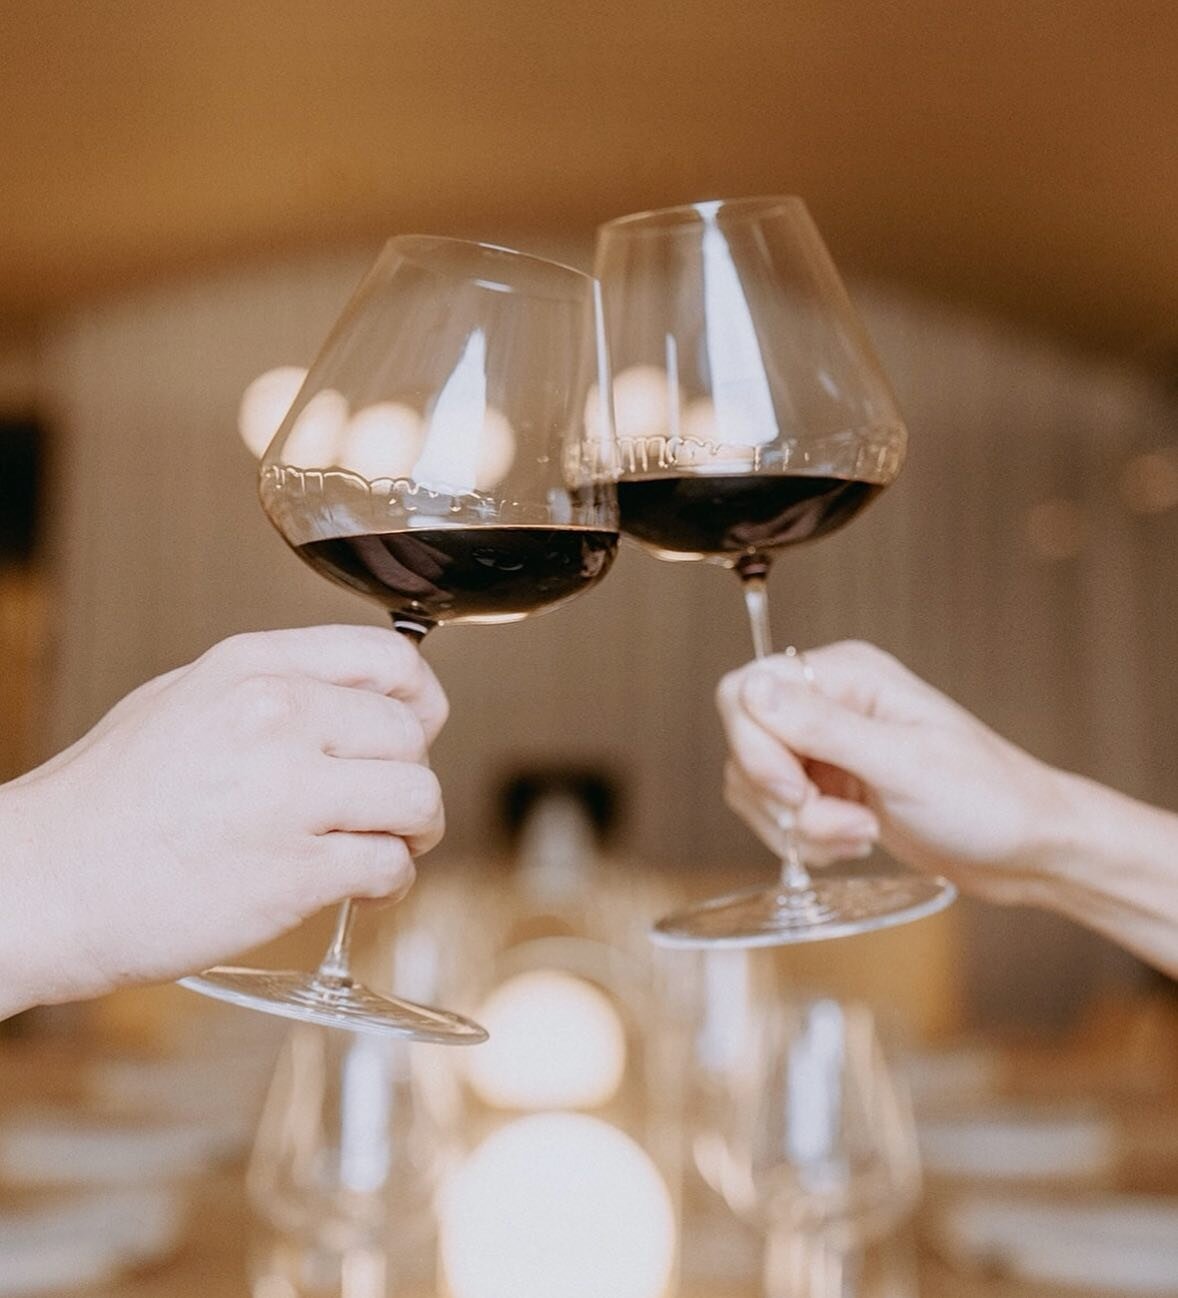 Cheers to a delicious red wine.